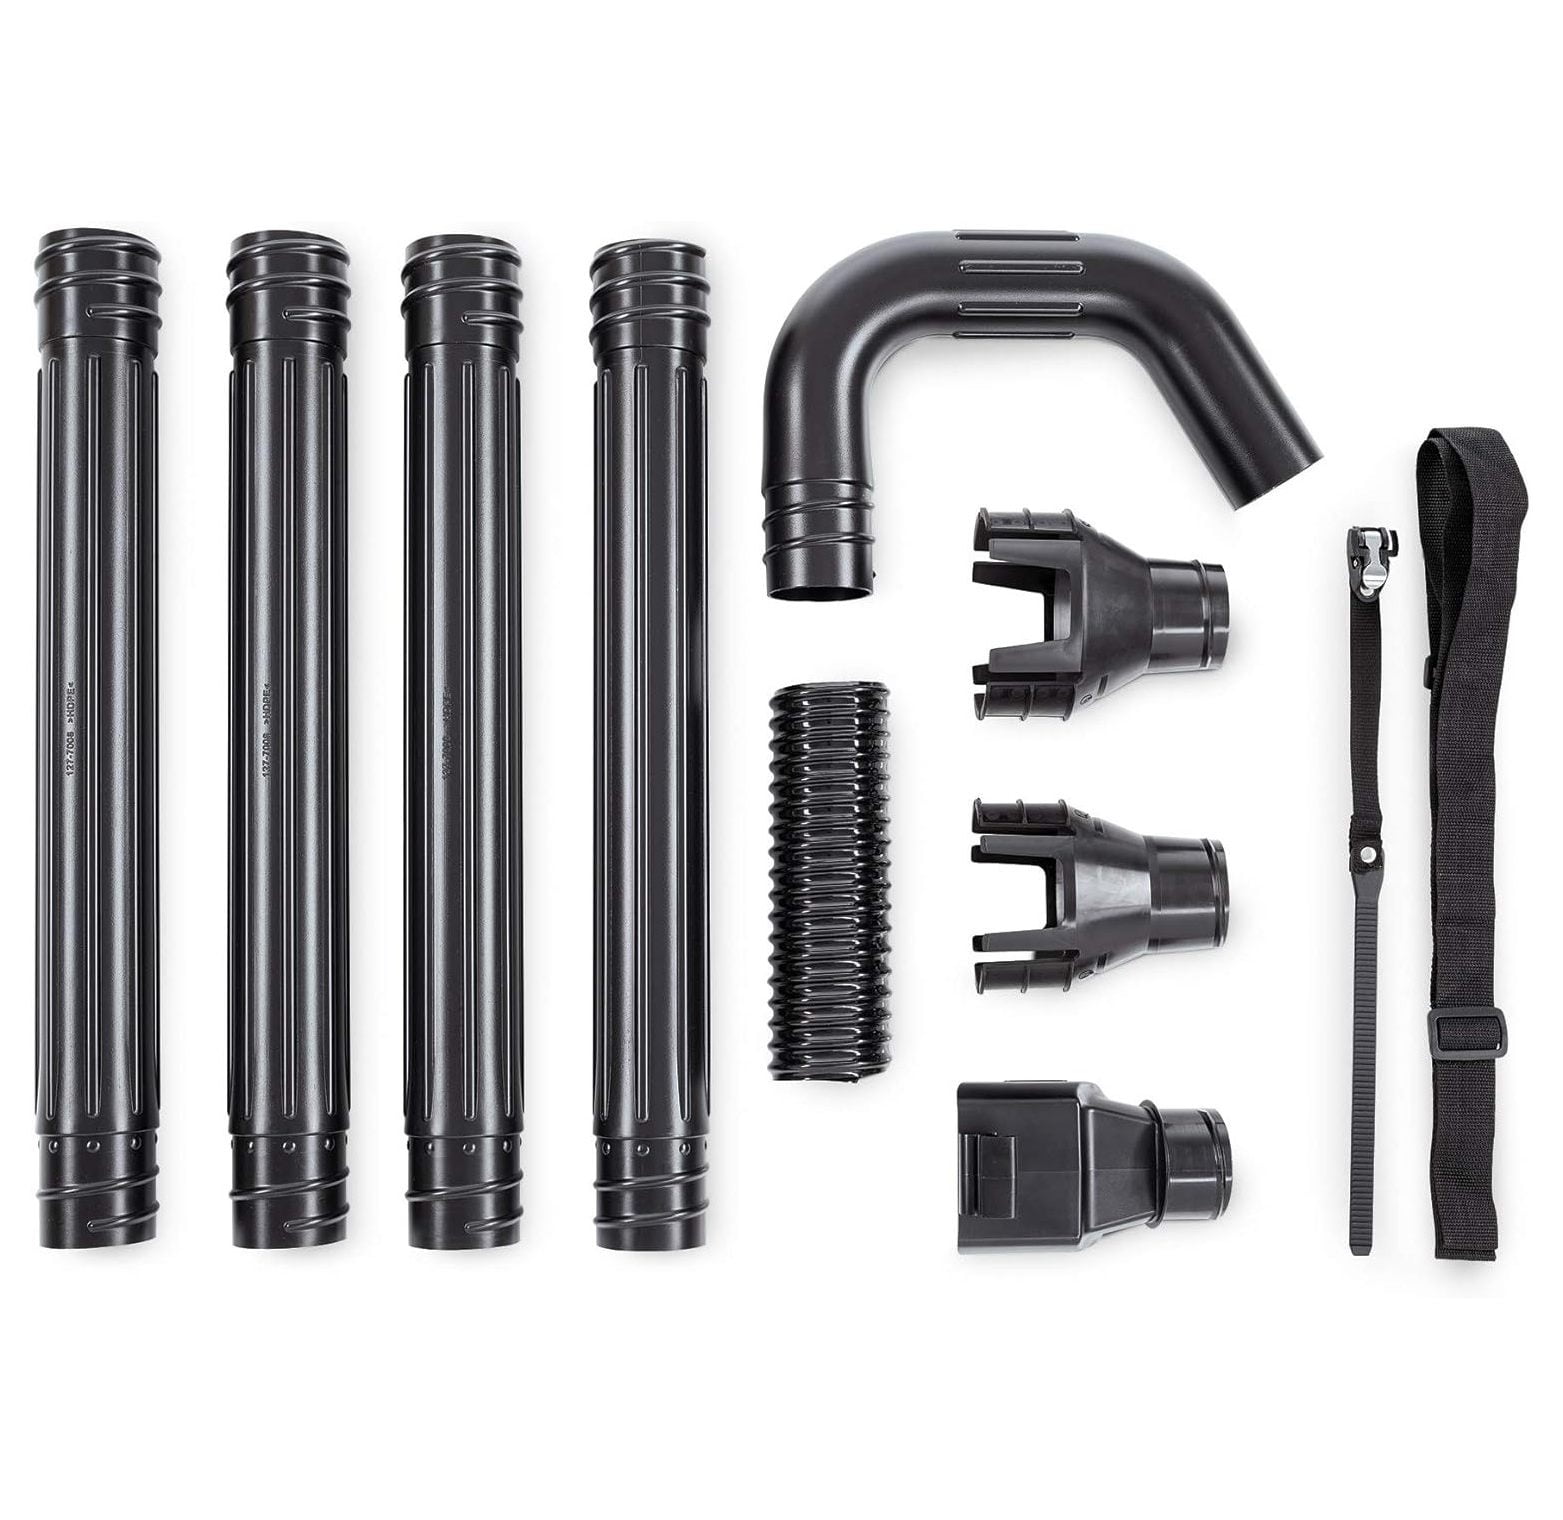 Worx WA4092 Universal Gutter Cleaning Kit for Blowers, Black